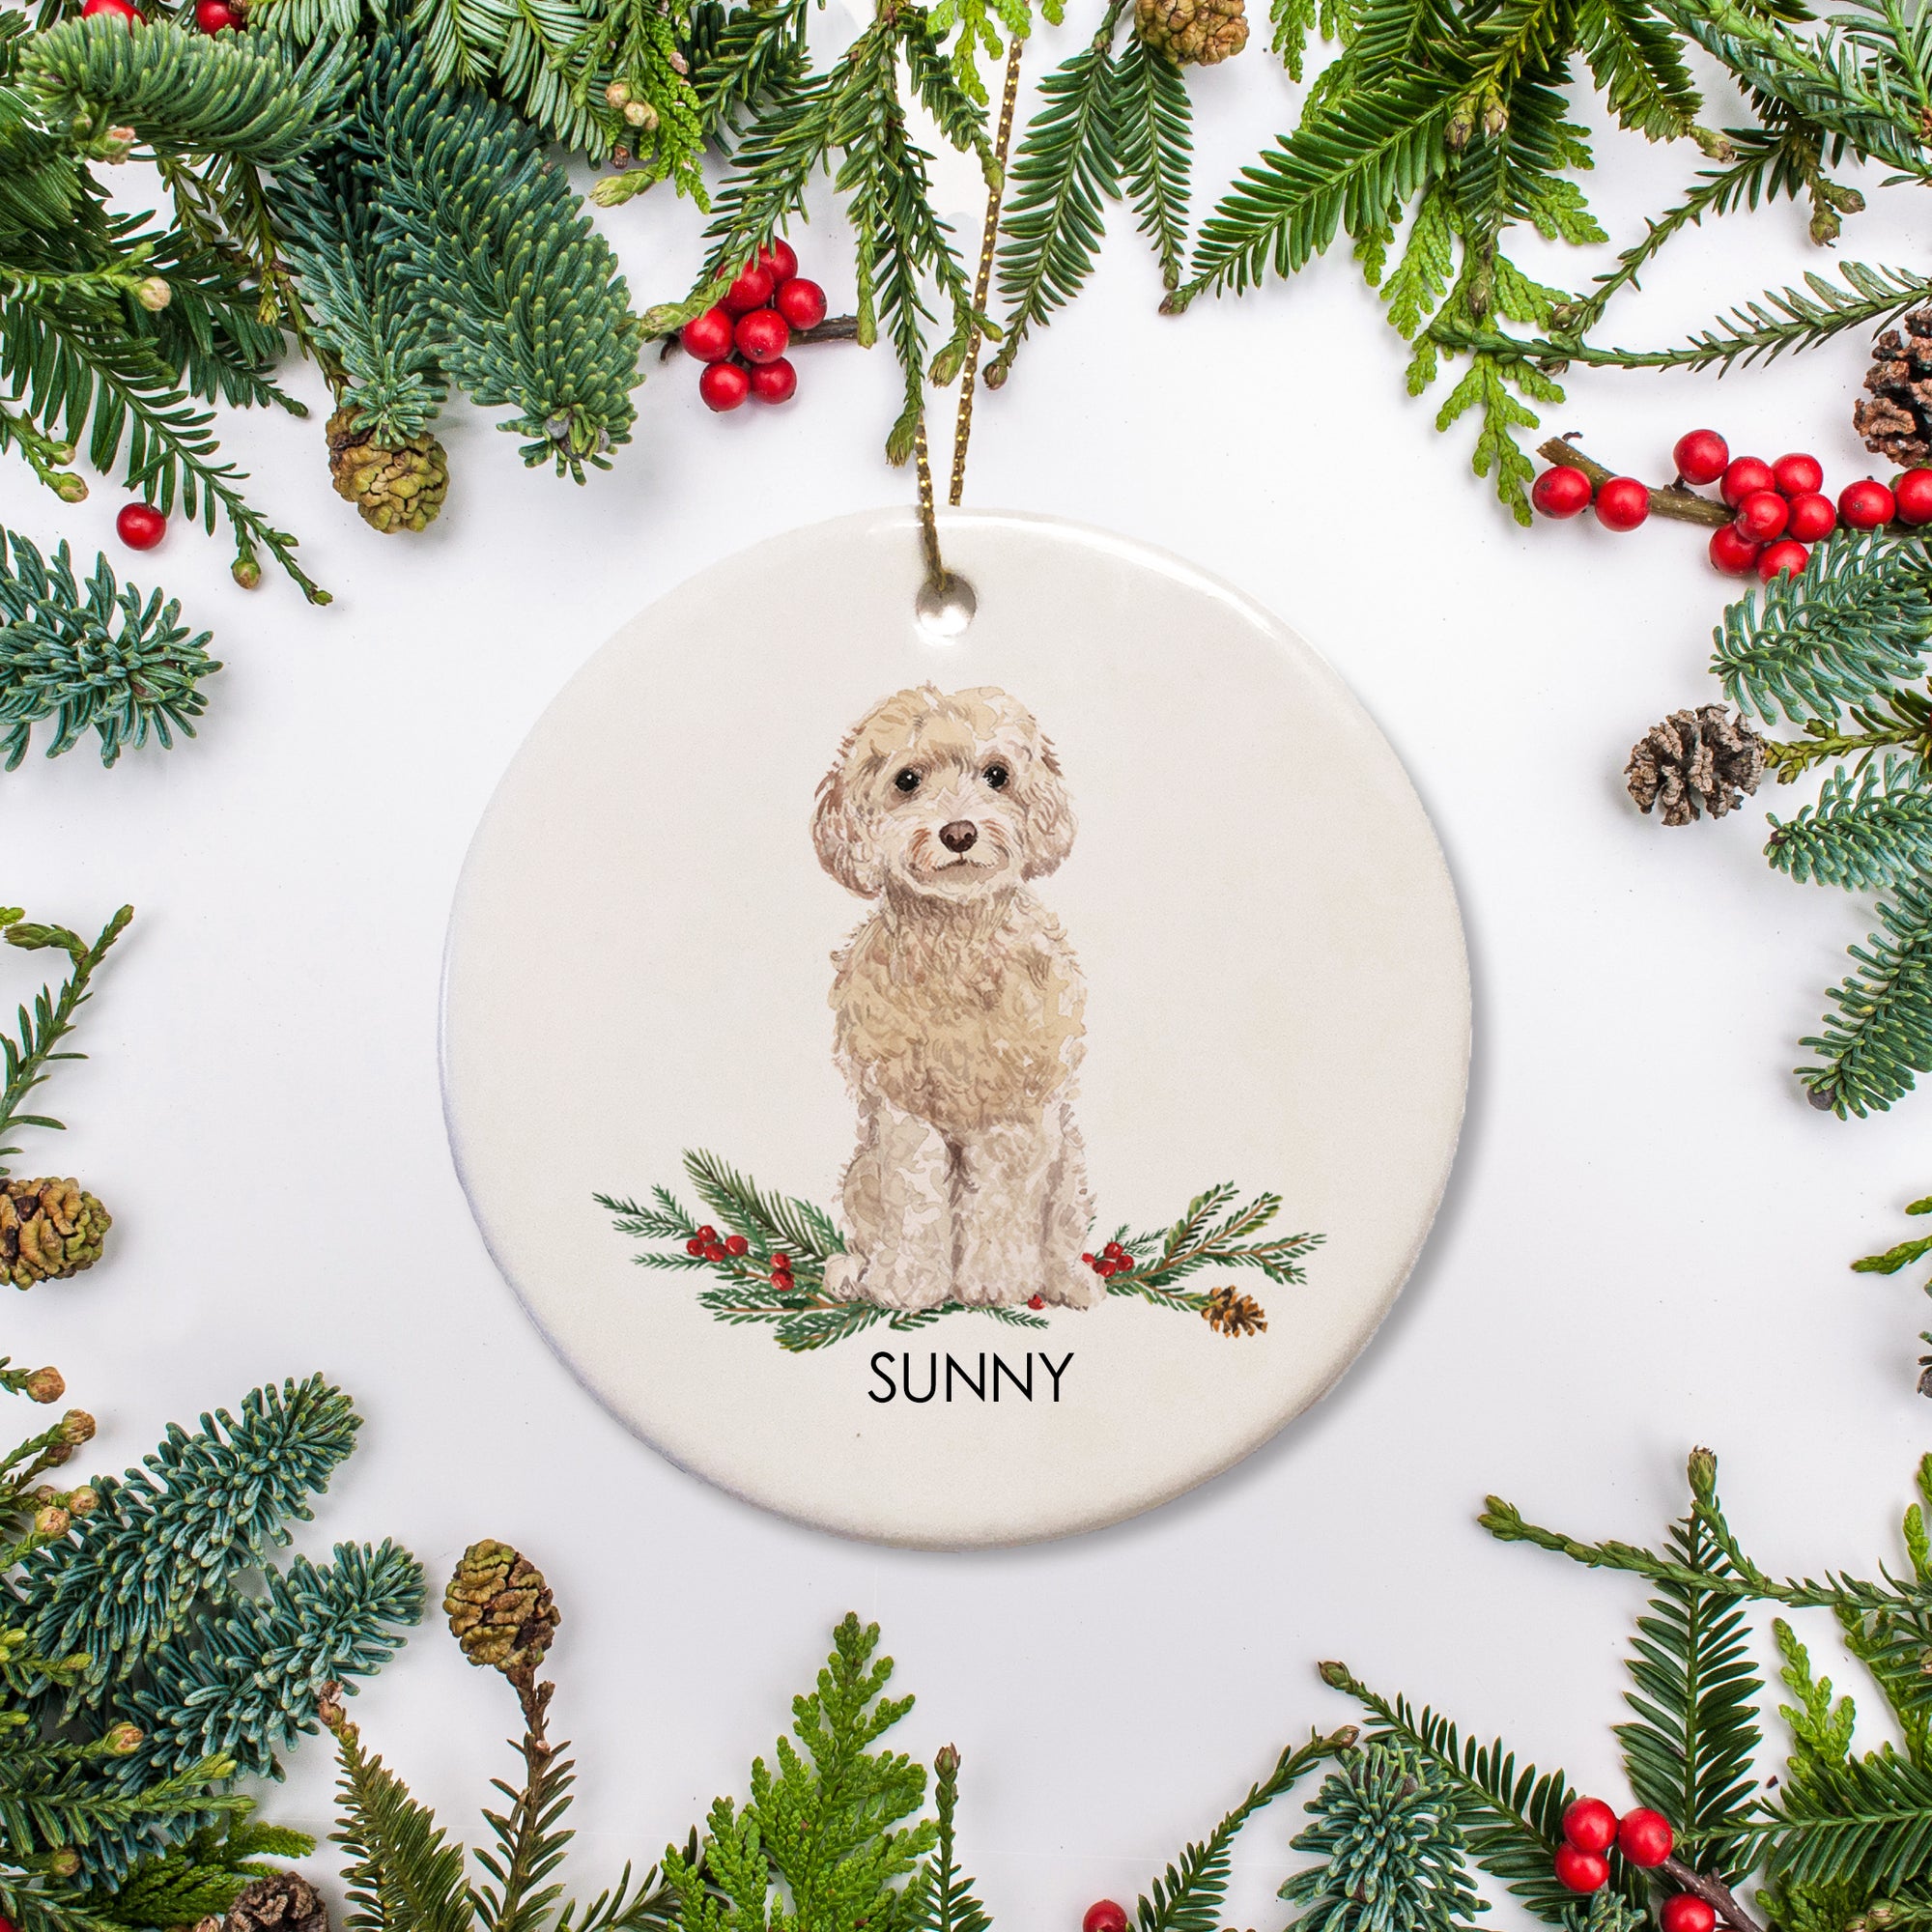 Cockapoo Christmas ornament featuring a champagne colored doodle sitting on a bed of holly. The ceramic ornament is personalized with your dog's name and the year